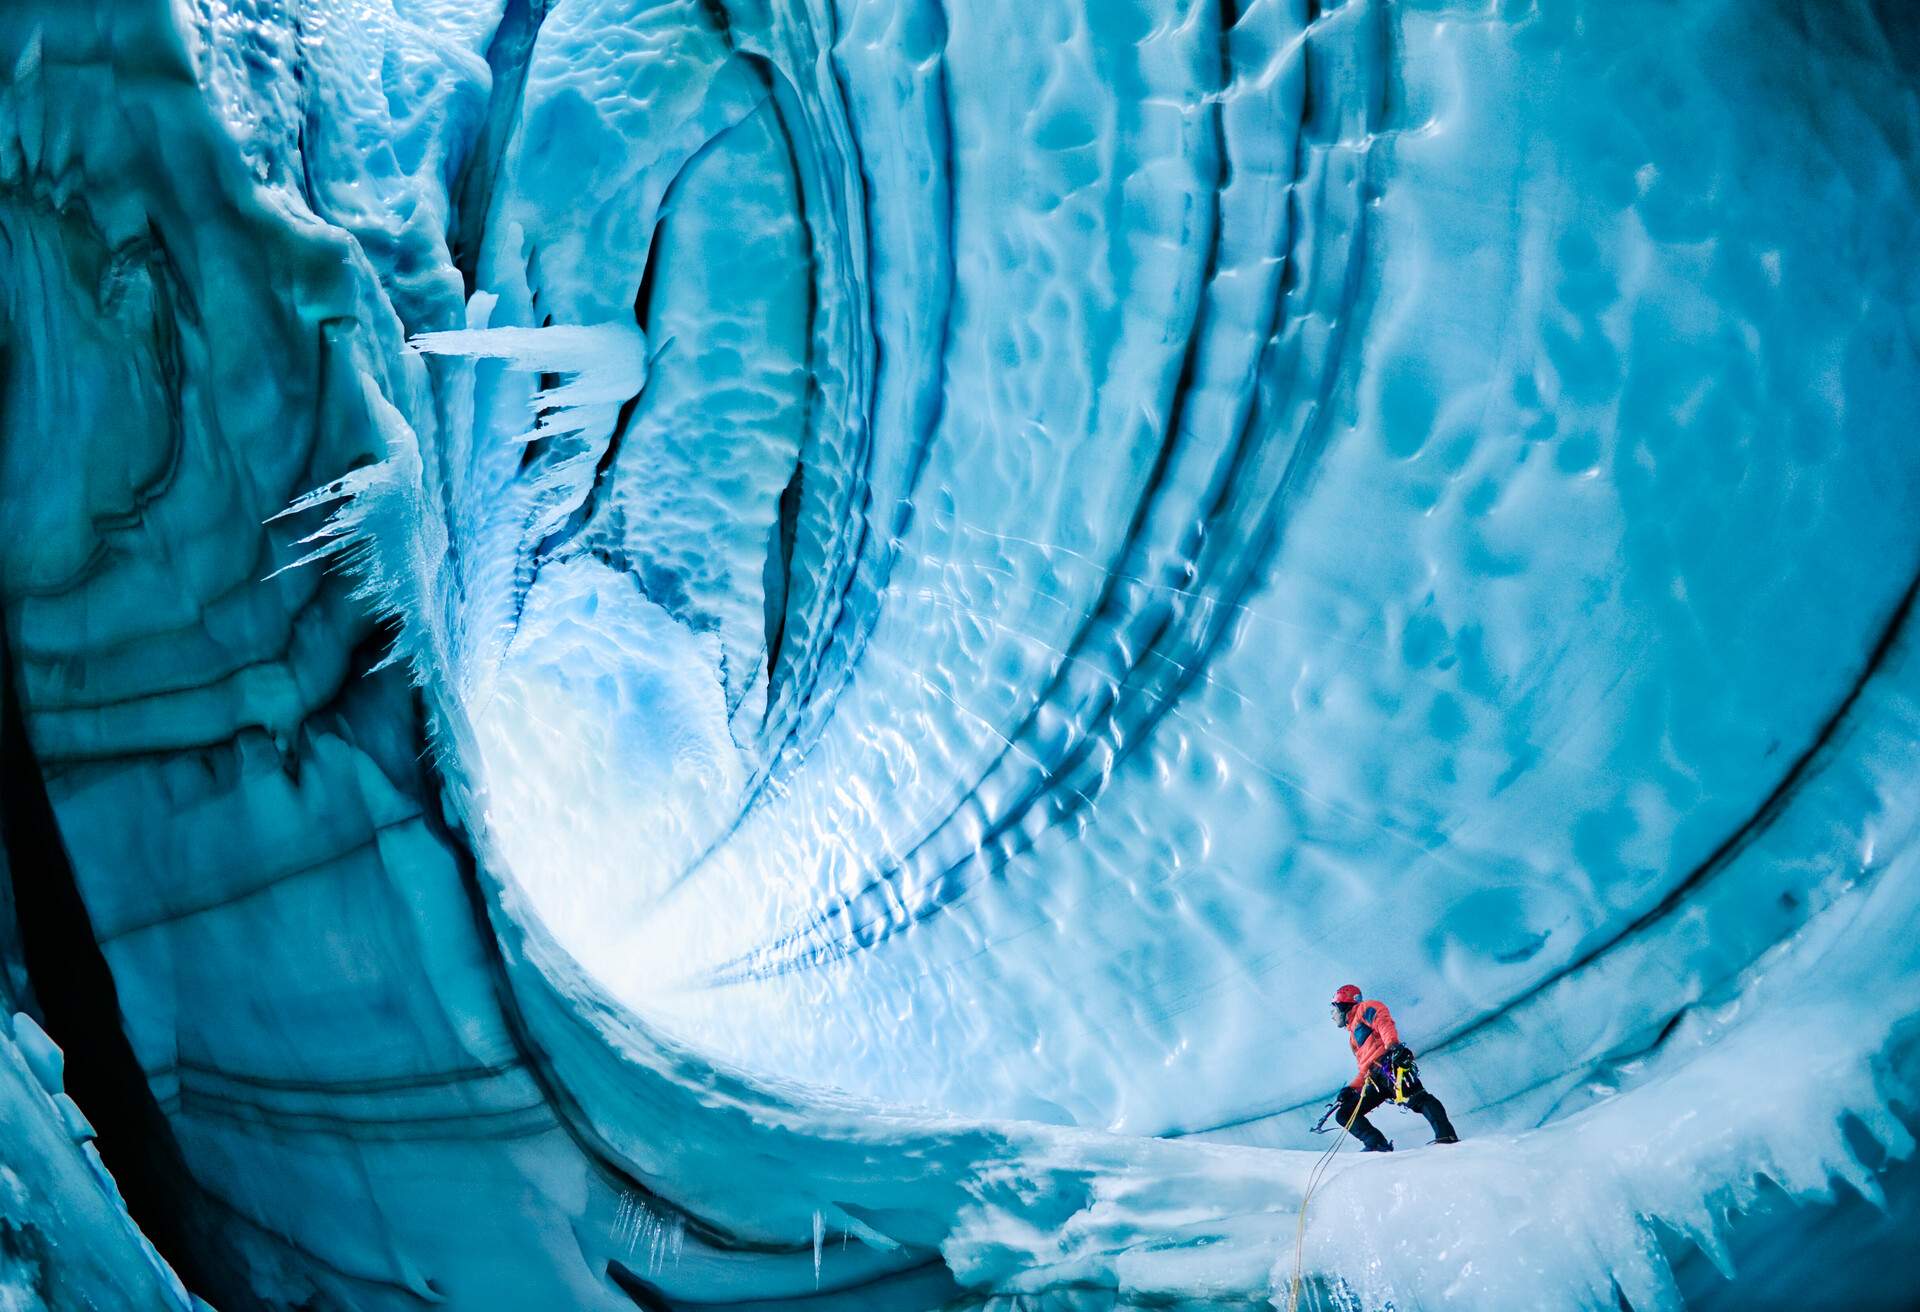 Langjokull Glacier, Iceland. Caves are formed from either hot springs underneath glacier or meltwater from surface. Climber is 80 feet below surface of glacier 